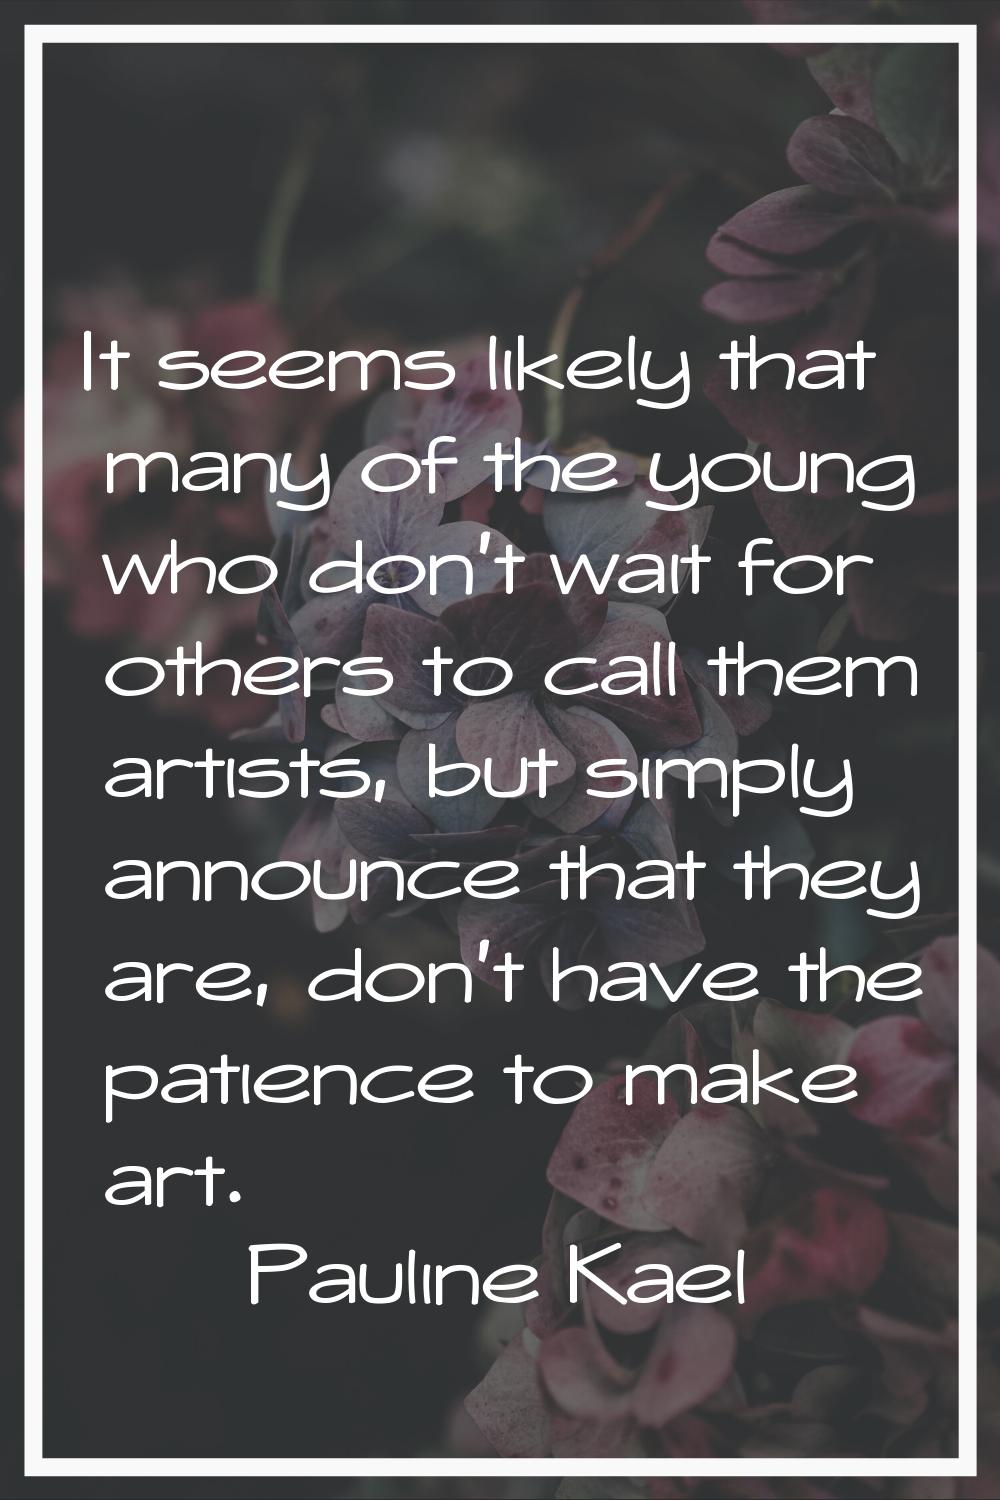 It seems likely that many of the young who don't wait for others to call them artists, but simply a